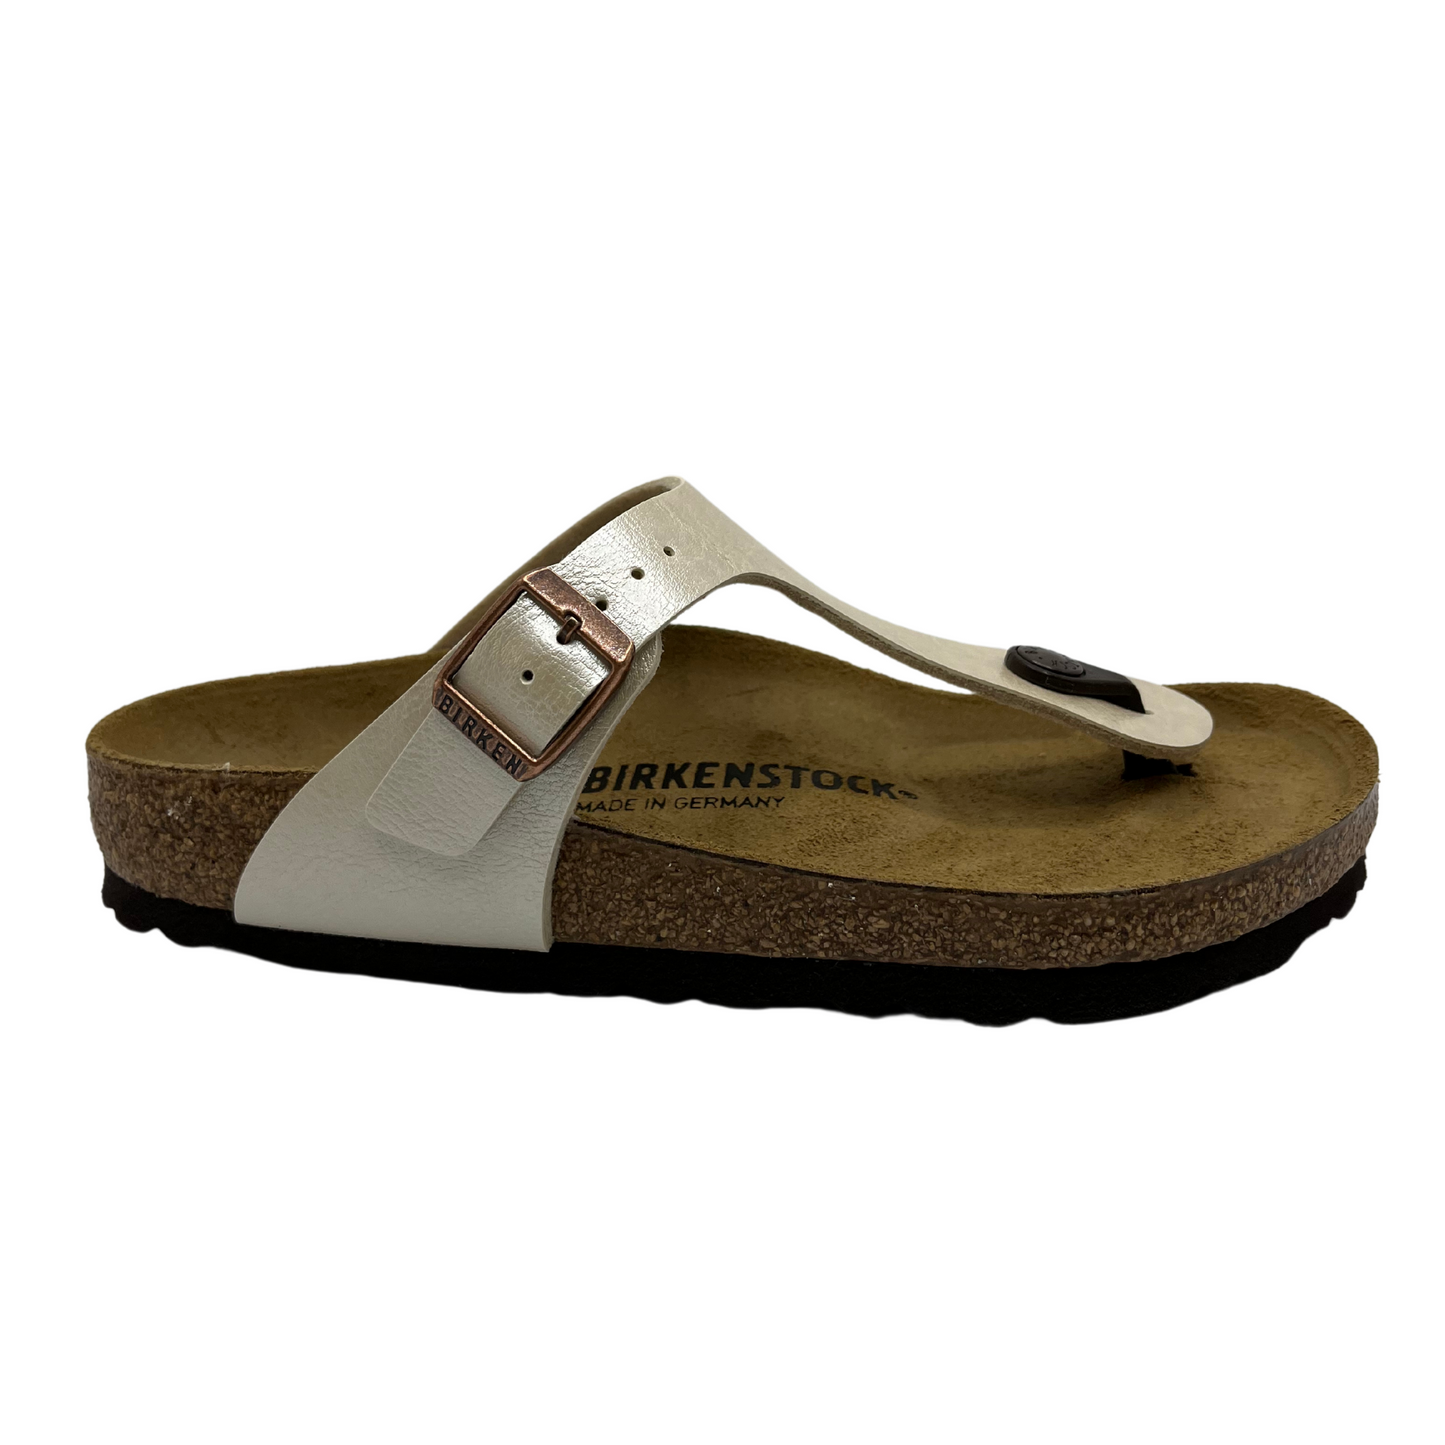 Right facing view of synthetic leather thong sandal with bronze buckle strap and suede lined contoured footbed.